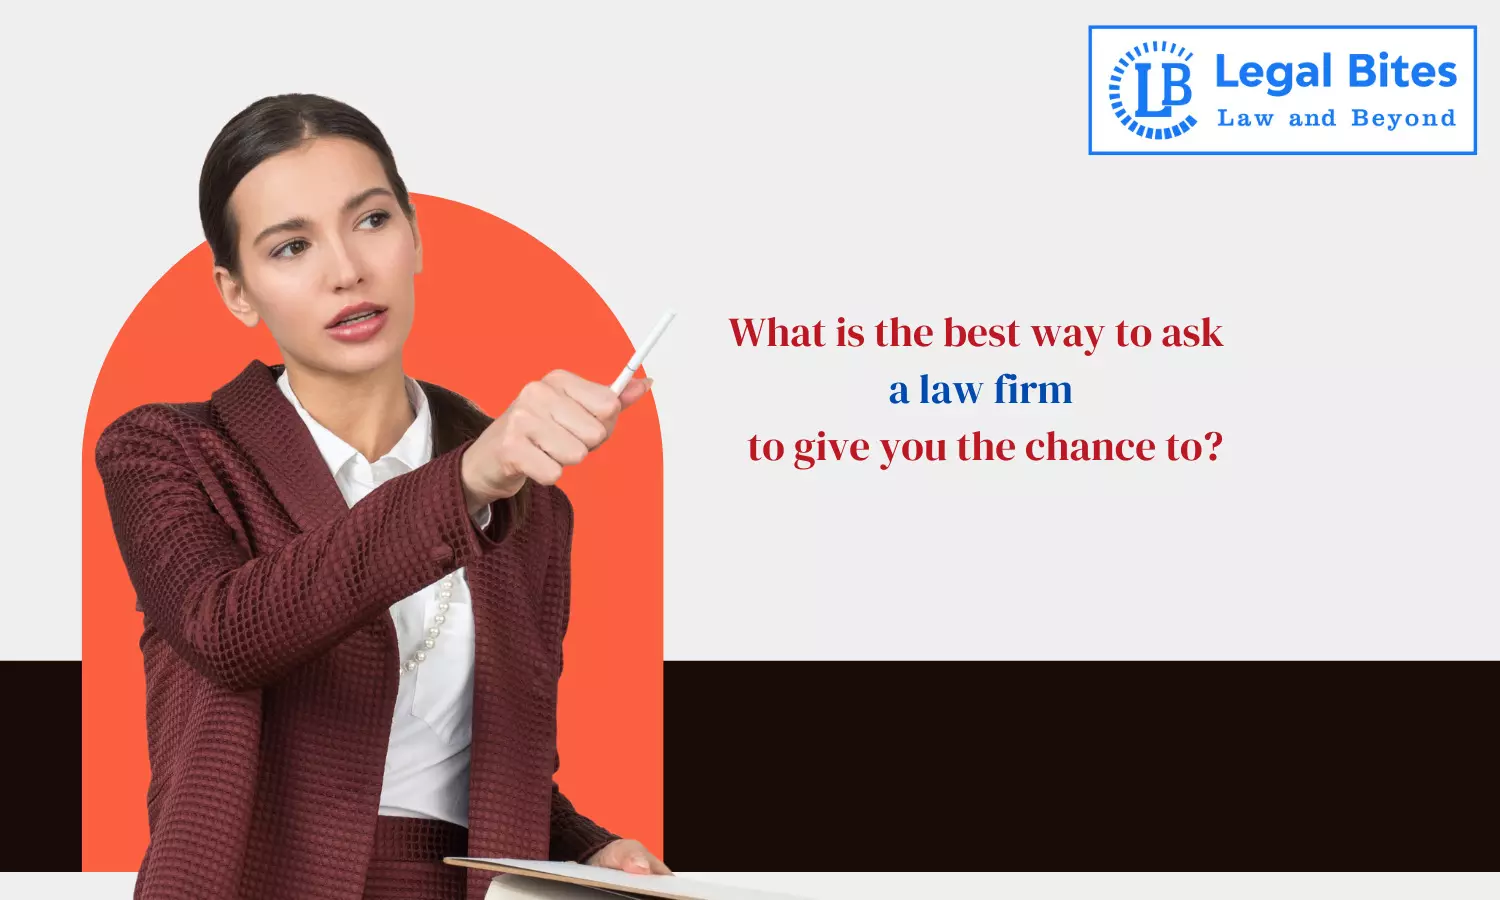 What is the best way to ask a law firm to give you the chance to?